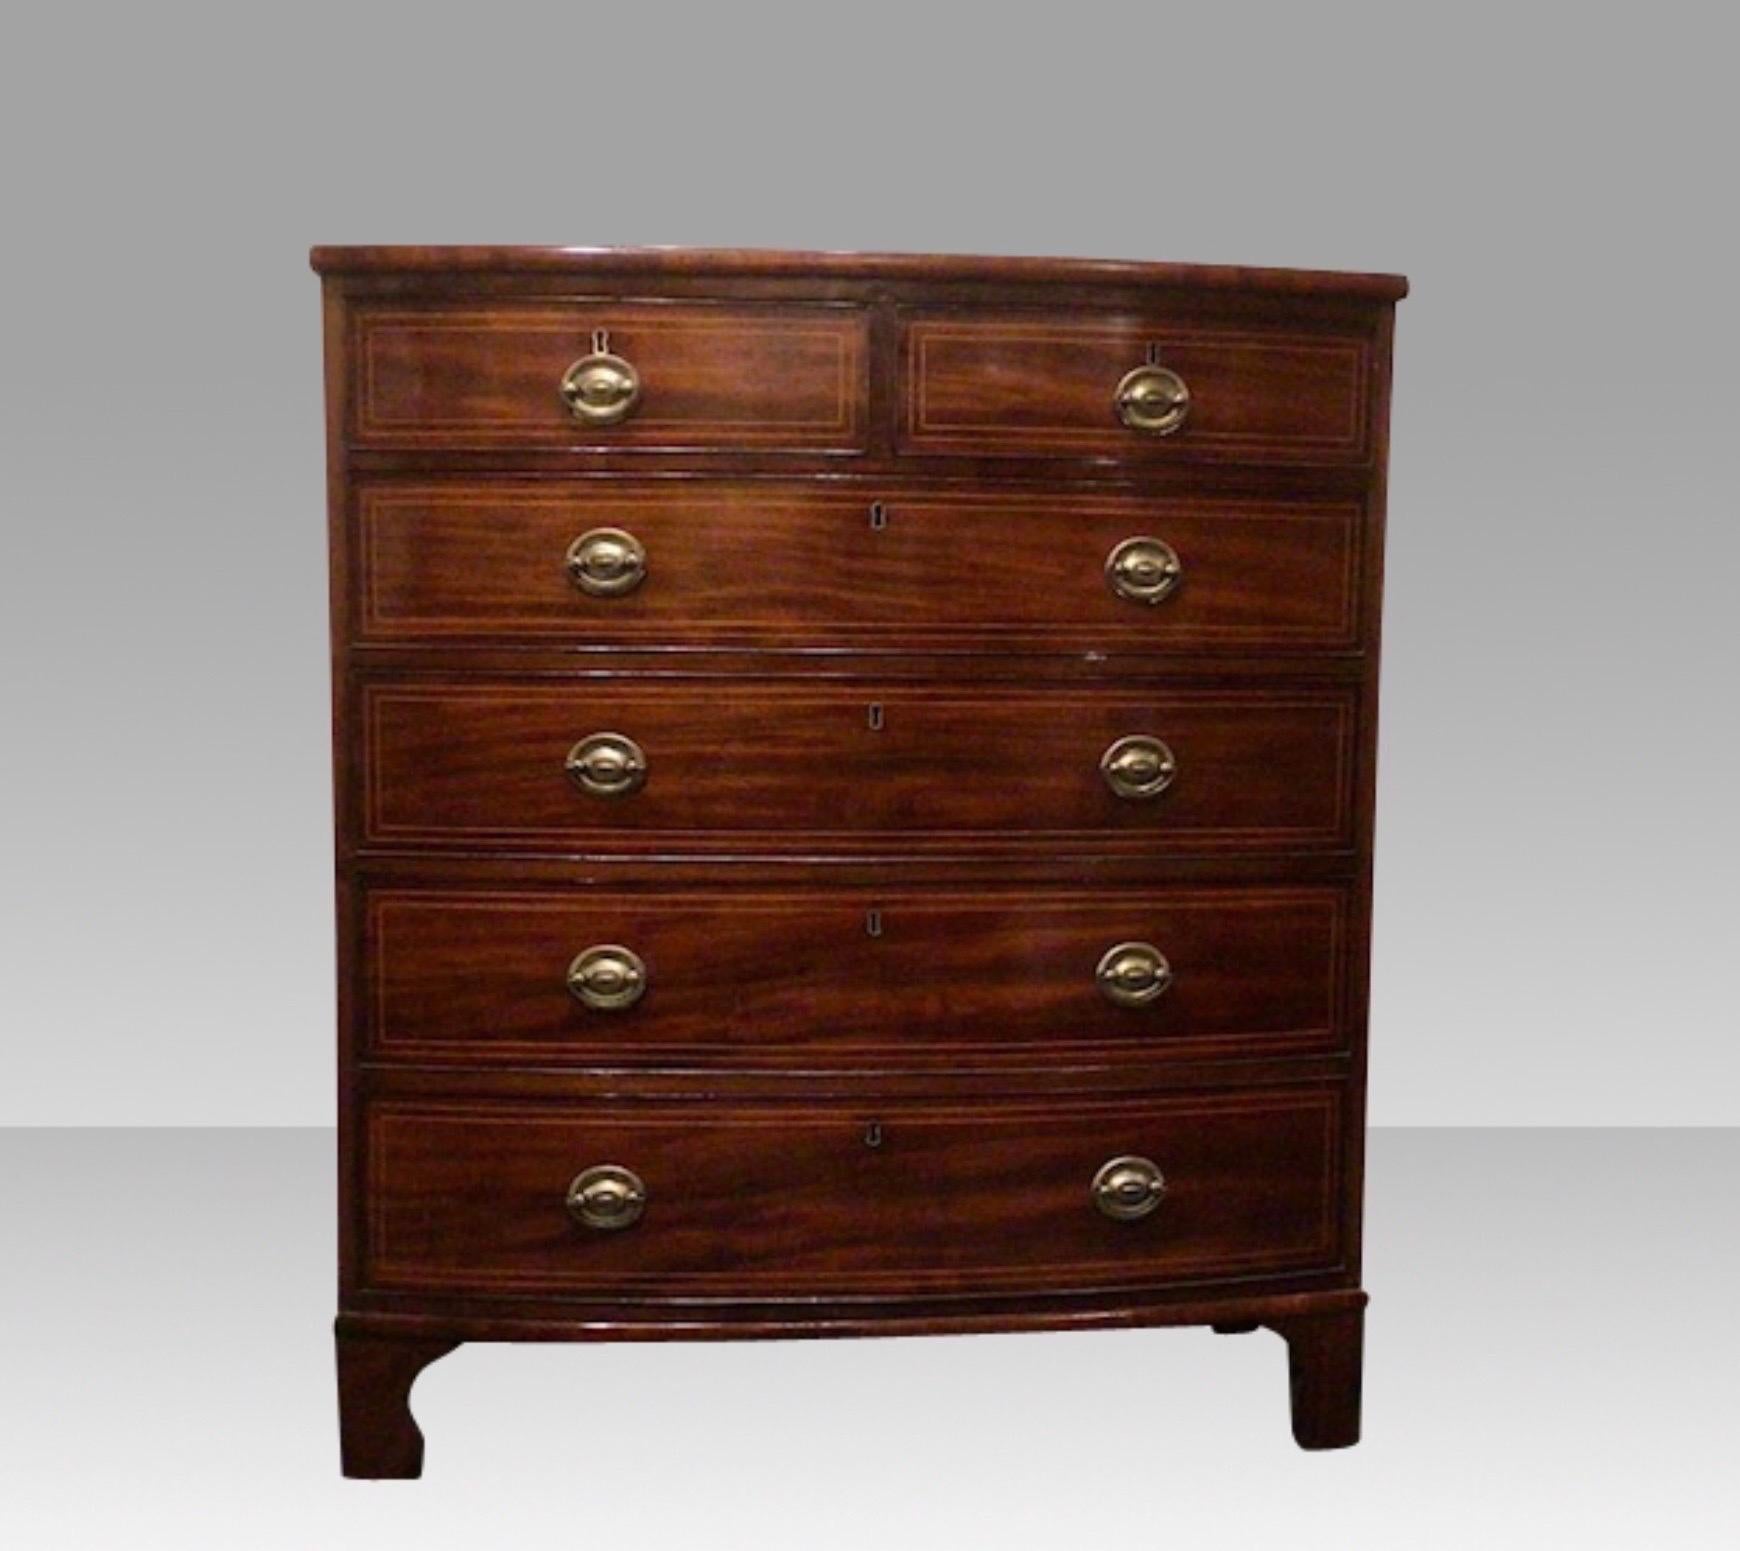 Superb Period Georgian Inlaid Mahogany Antique Bow Front Chest Of Drawers
c1820
Measures: 41.5ins wide x 21ins deep x 47ins high.